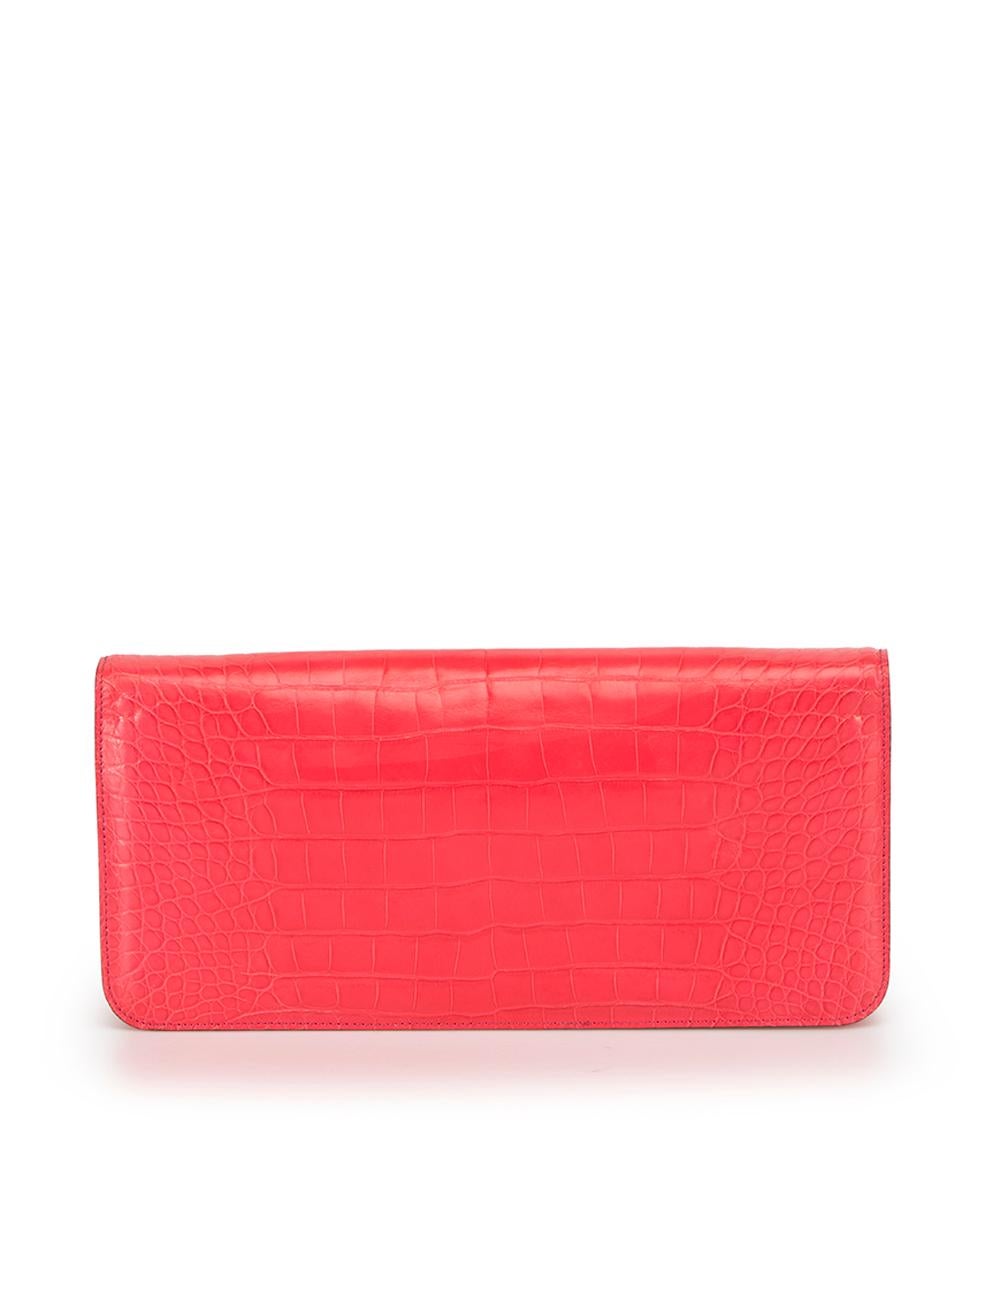 Tom Ford Women's Embossed Leather Natalia East West Turnlock Convertible Clutch In Good Condition For Sale In London, GB